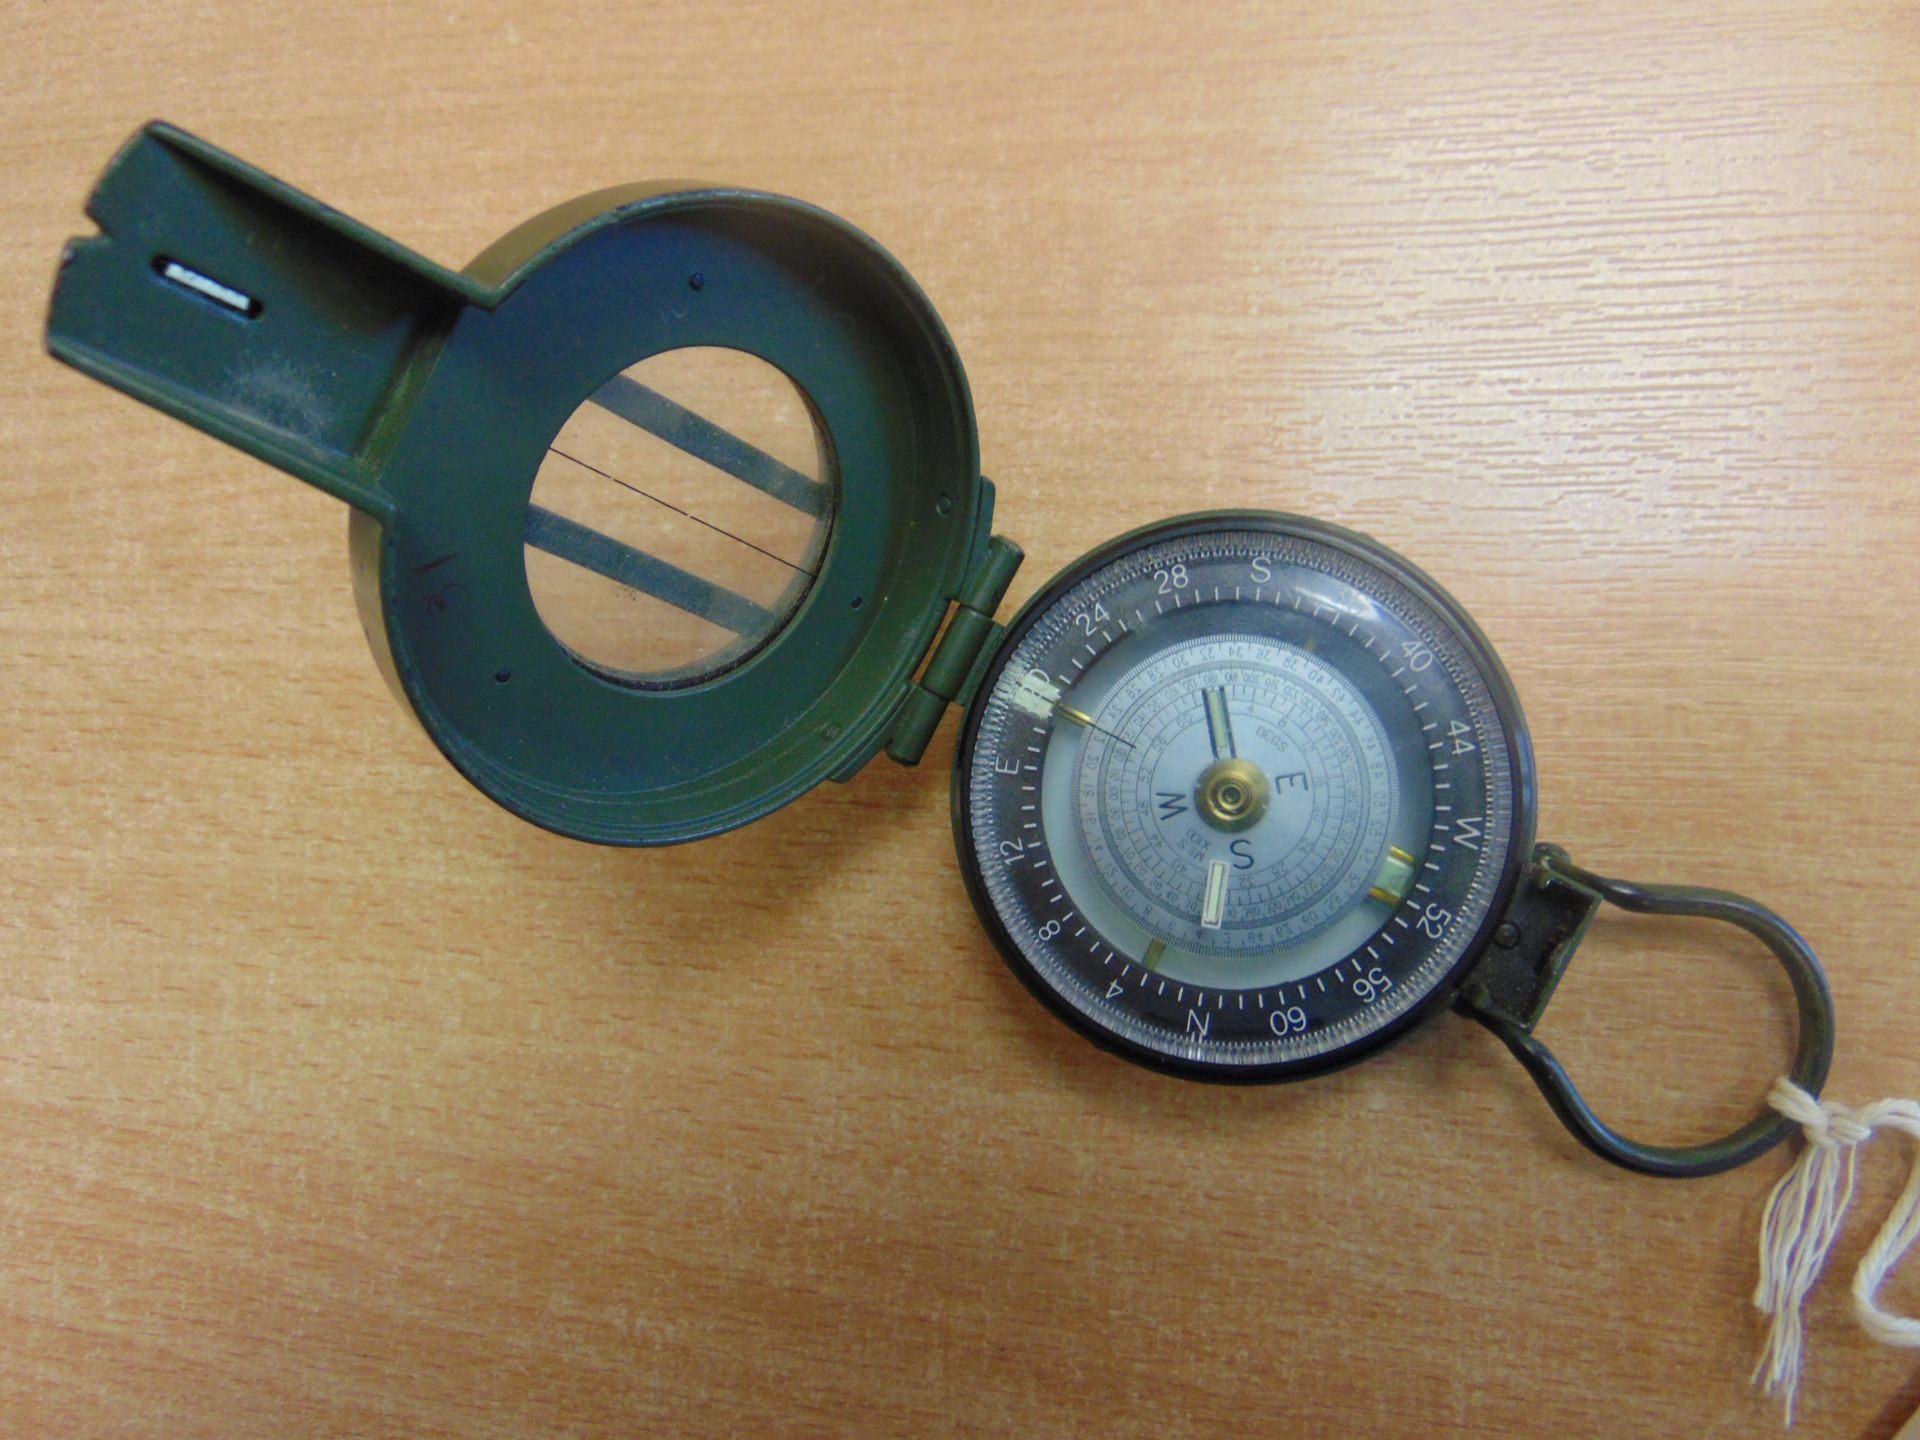 FRANCIS BAKER PRISMATIC COMPASS BRITISH ARMY ISSUE - NATO MARKS - Image 4 of 6